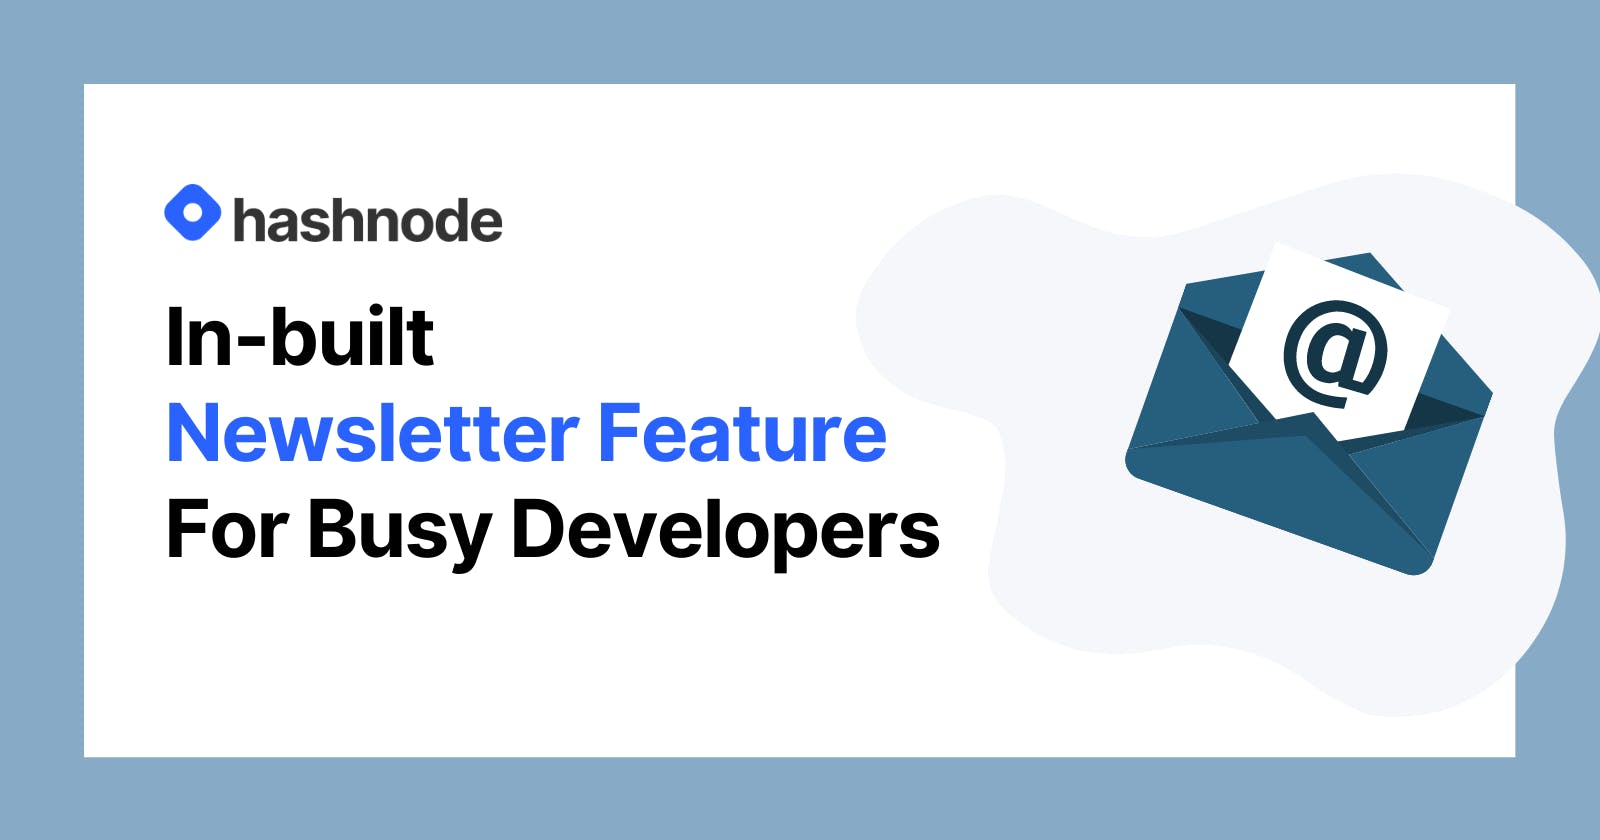 Hashnode Newsletter Feature - For Busy Developers